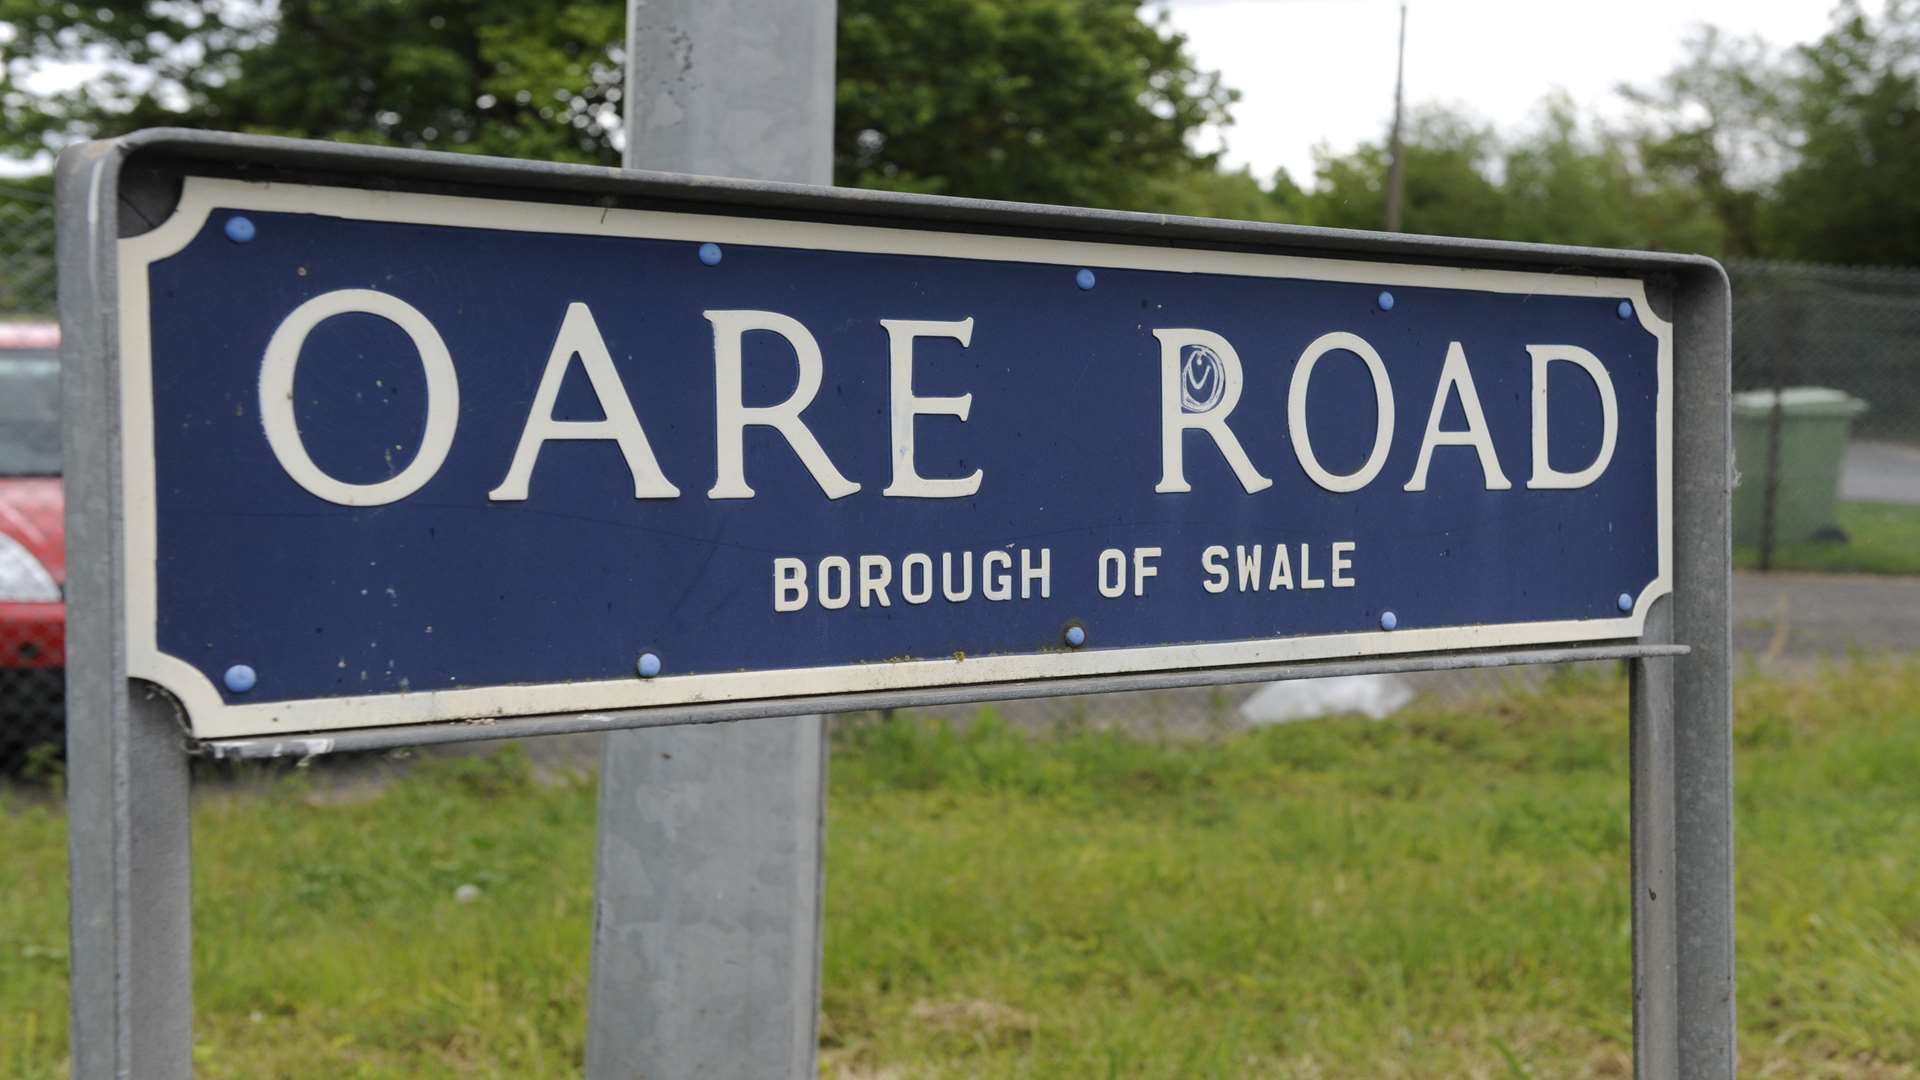 There are concerns about traffic along Oare Road.